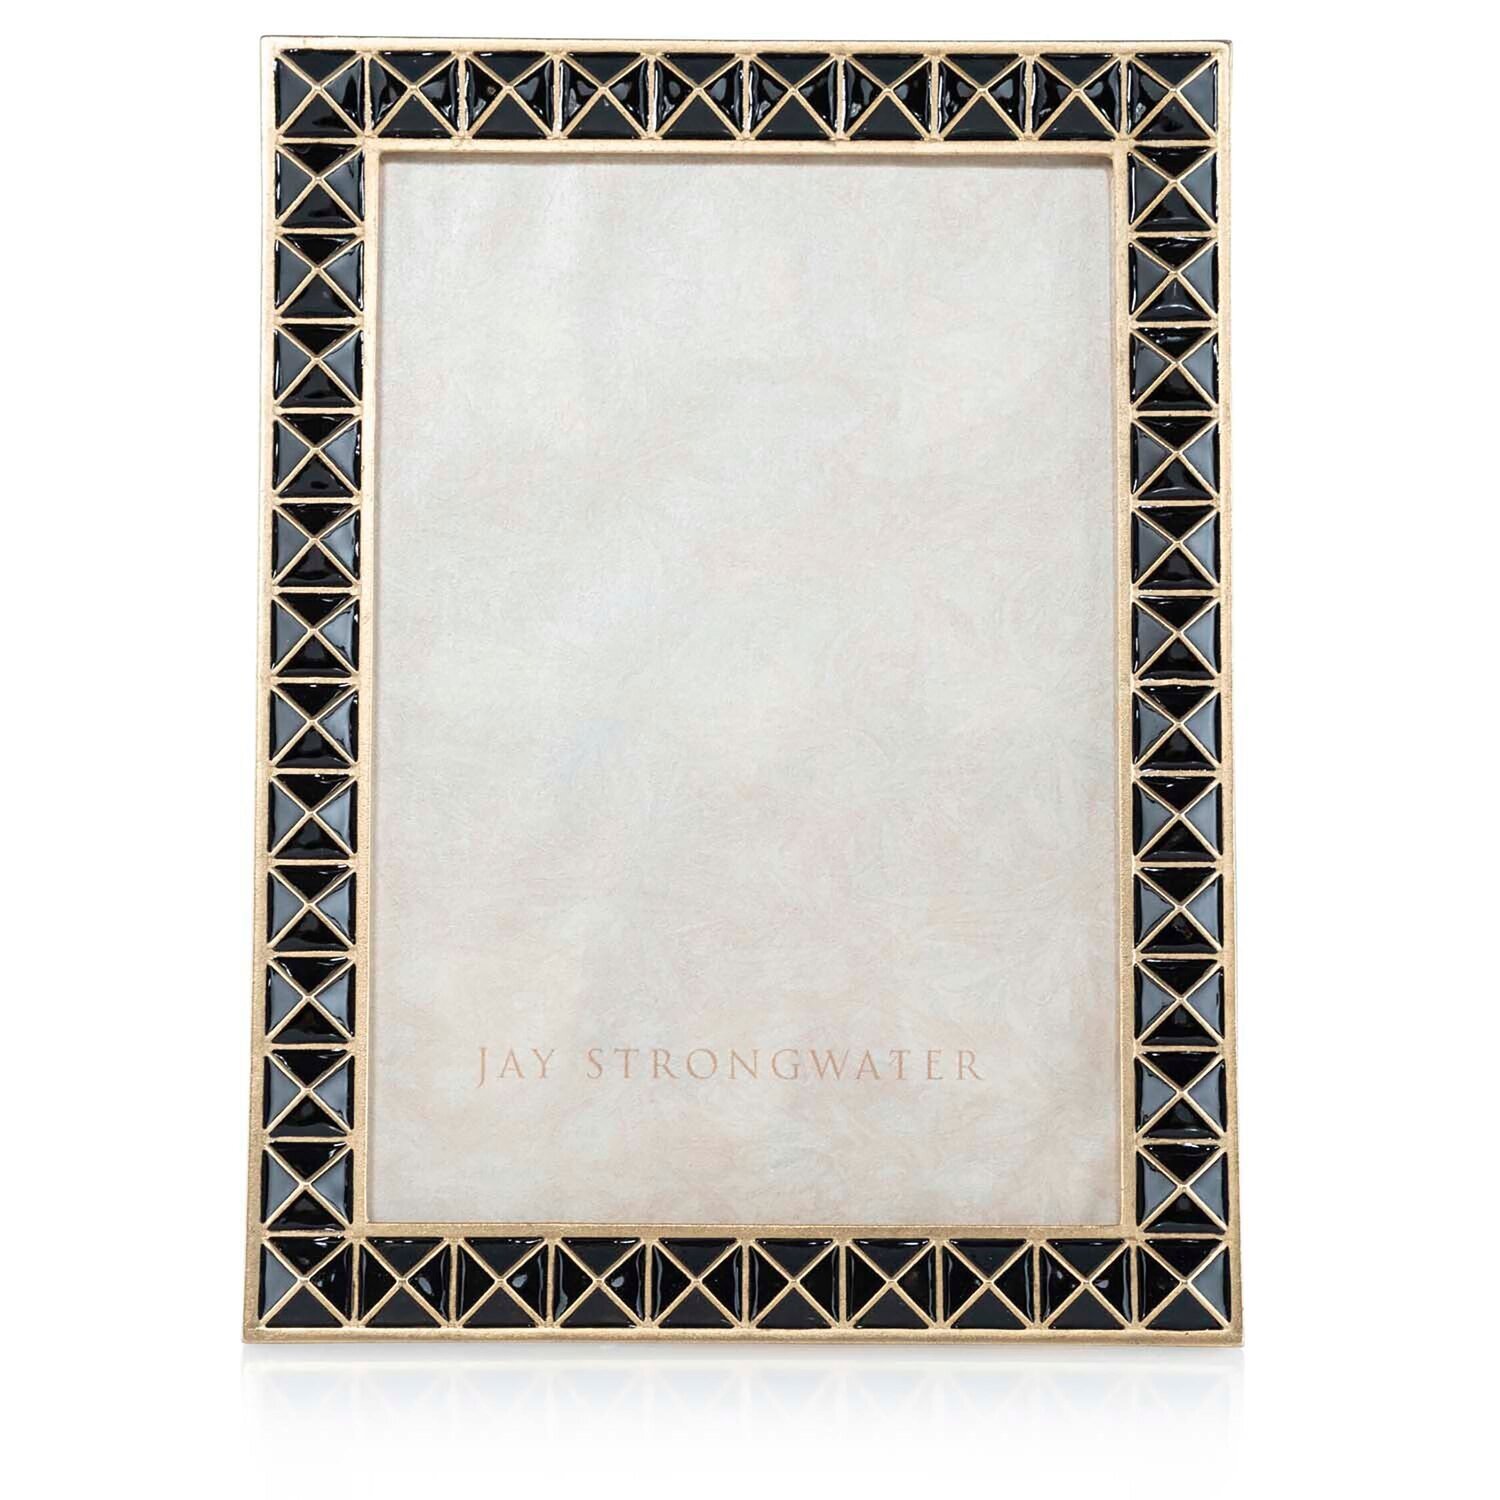 Jay Strongwater Pyramid 5 x 7 Inch Picture Frame SPF5877-220